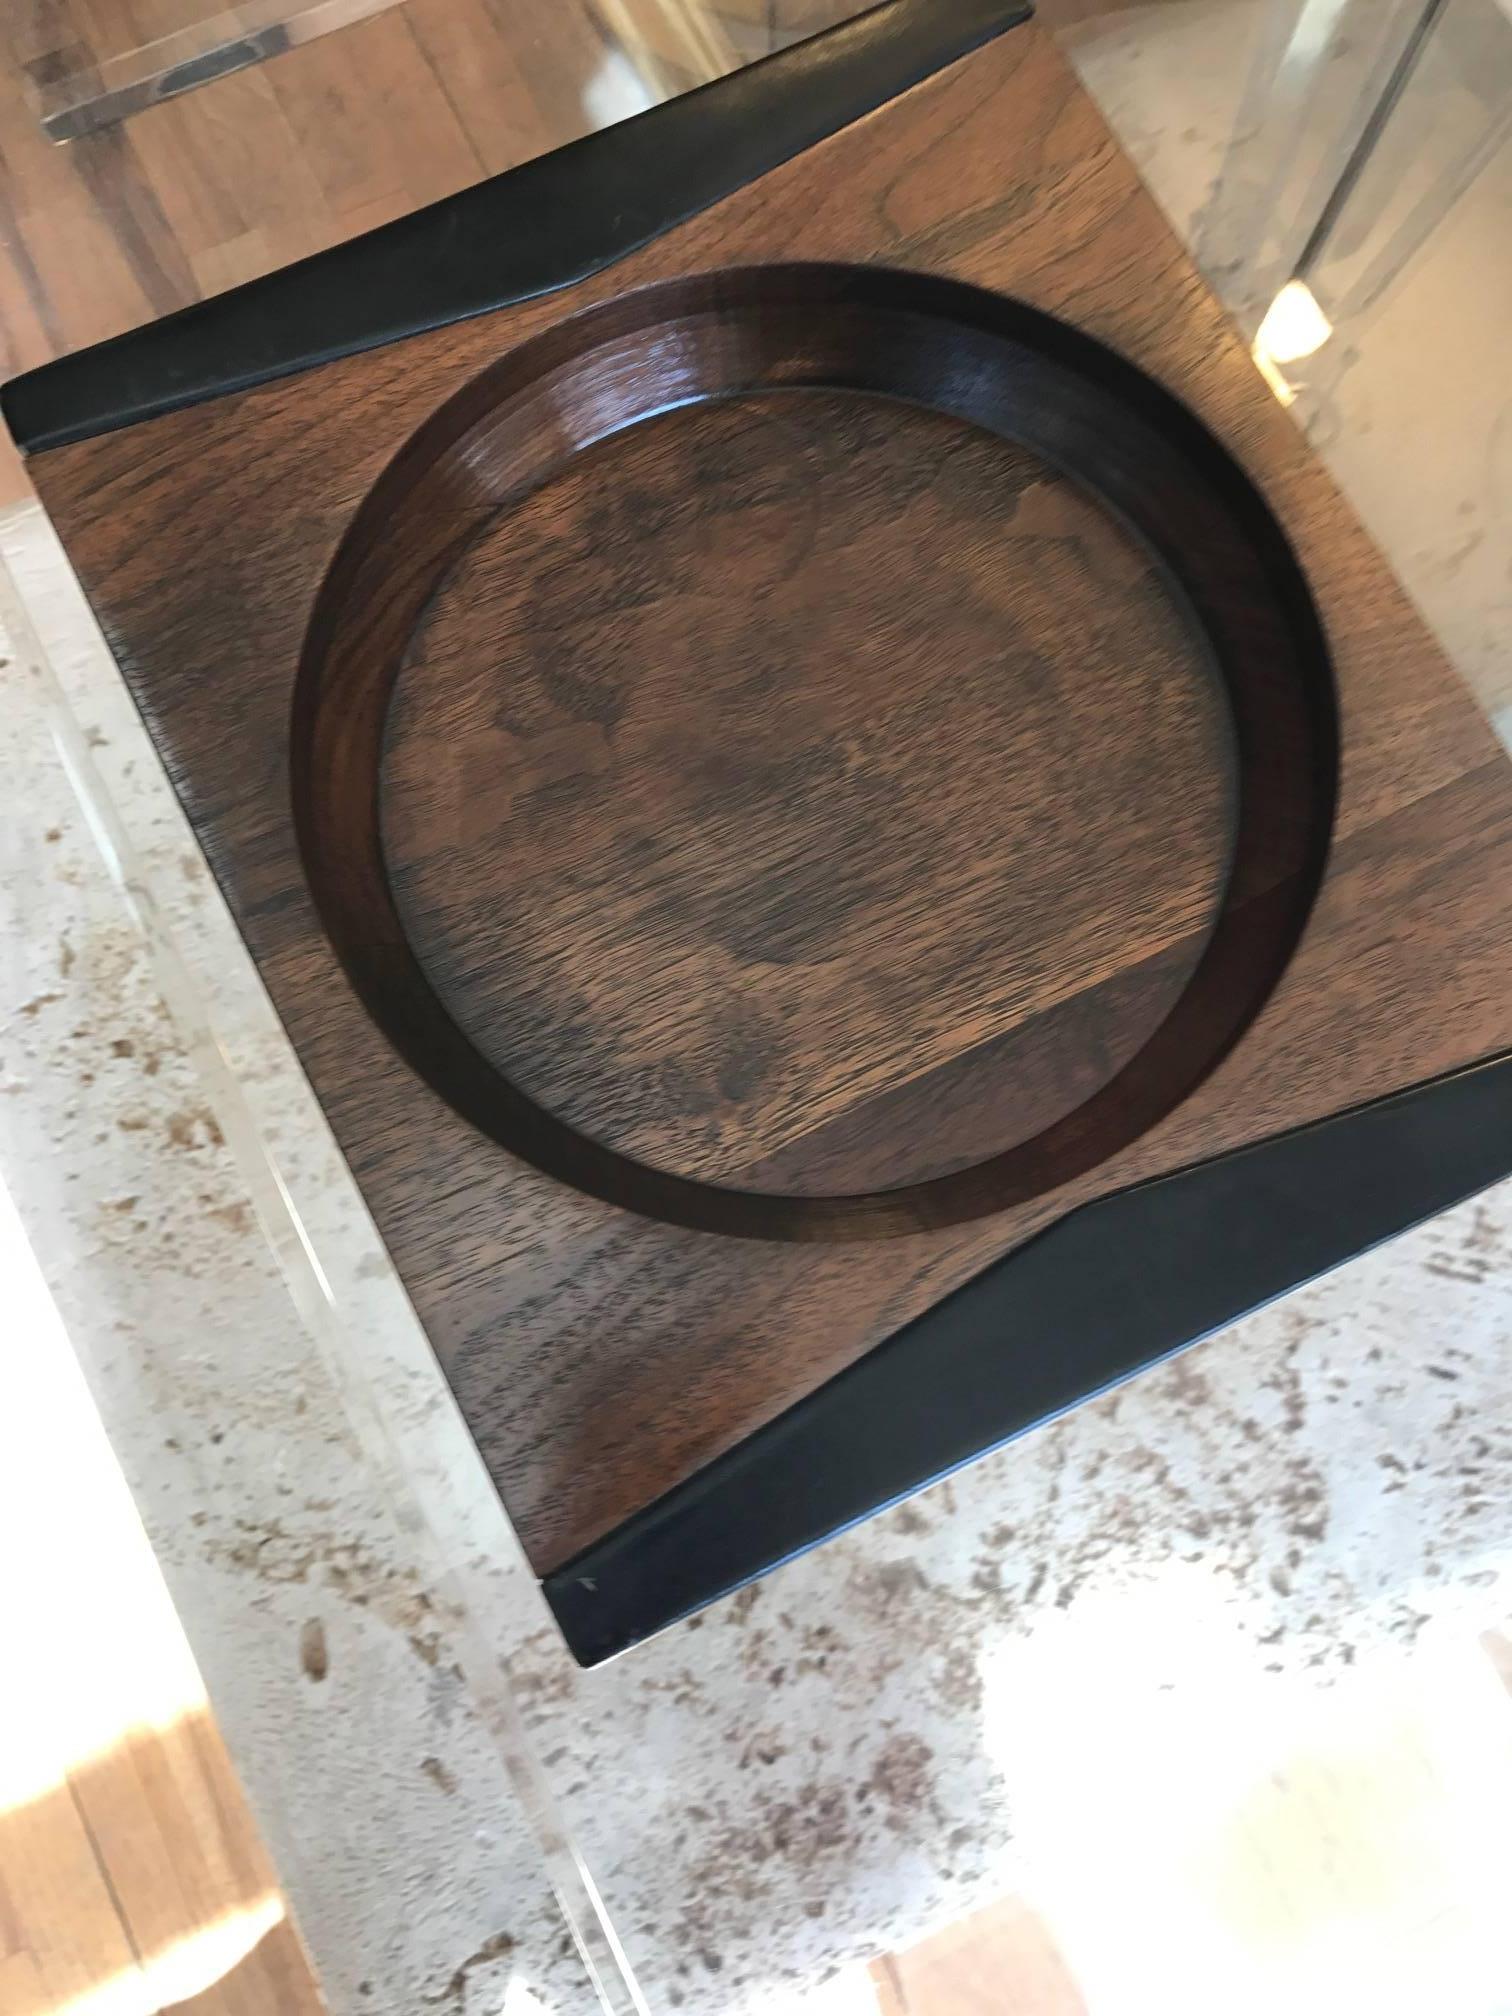 A highly sculptural Italian walnut and leather Vide-Poche by Mark Cross.
A versatile decorative object.